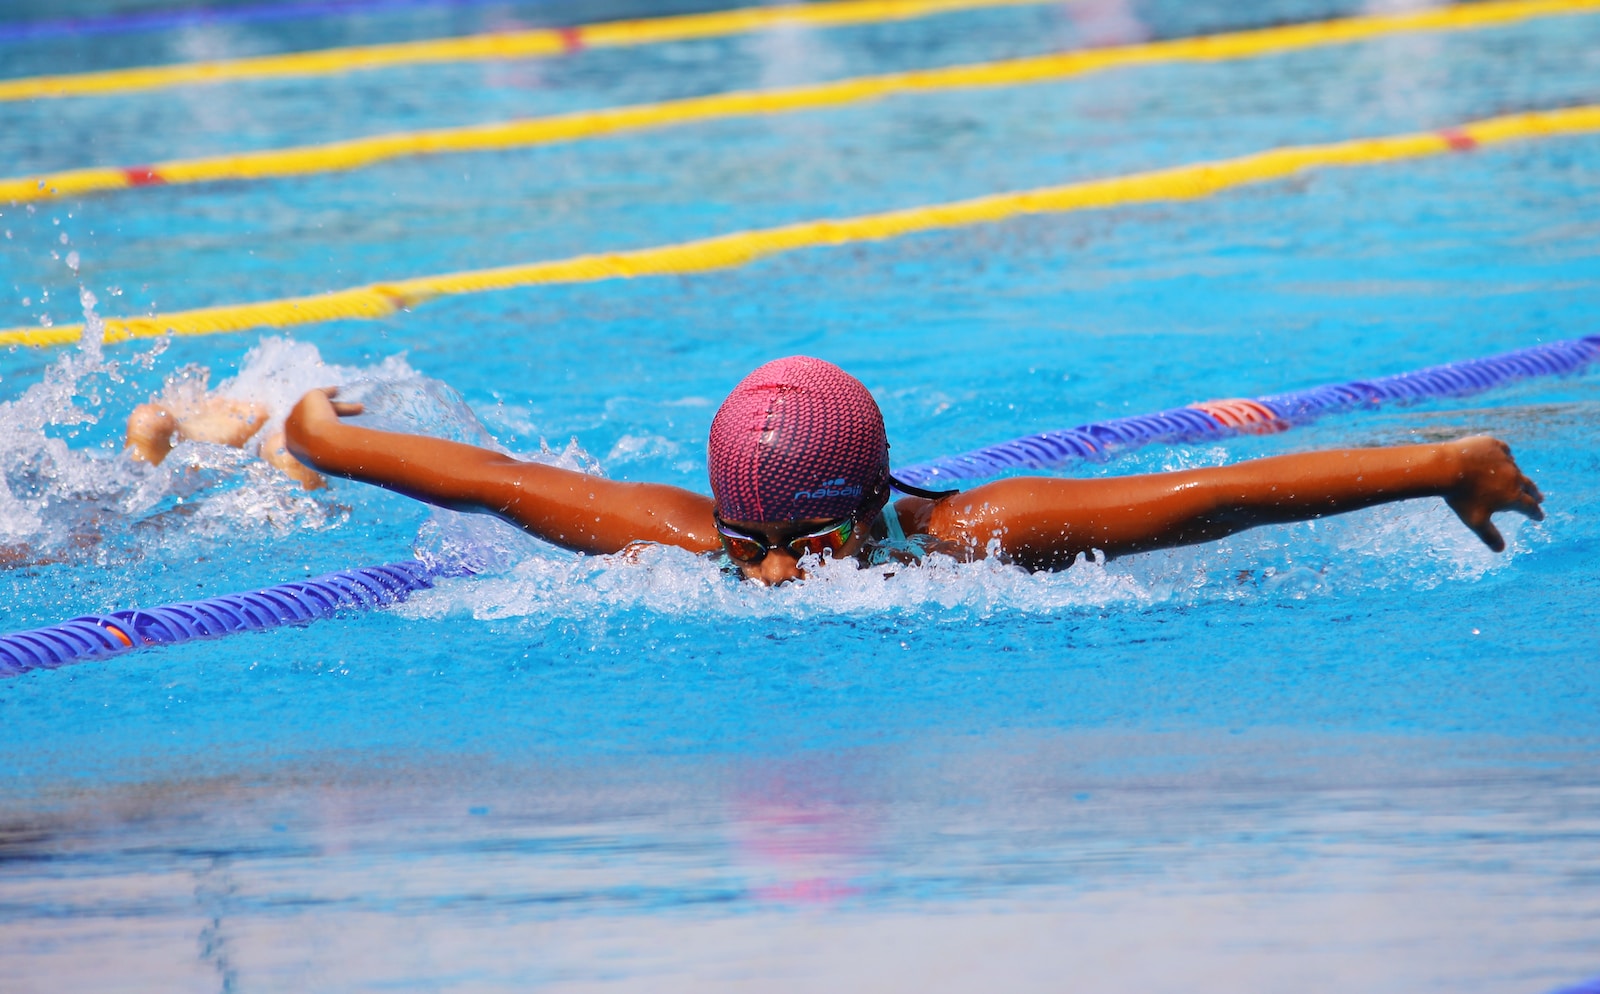 
#Swimming: Hashtags To Help You Get More Reach On Social Media